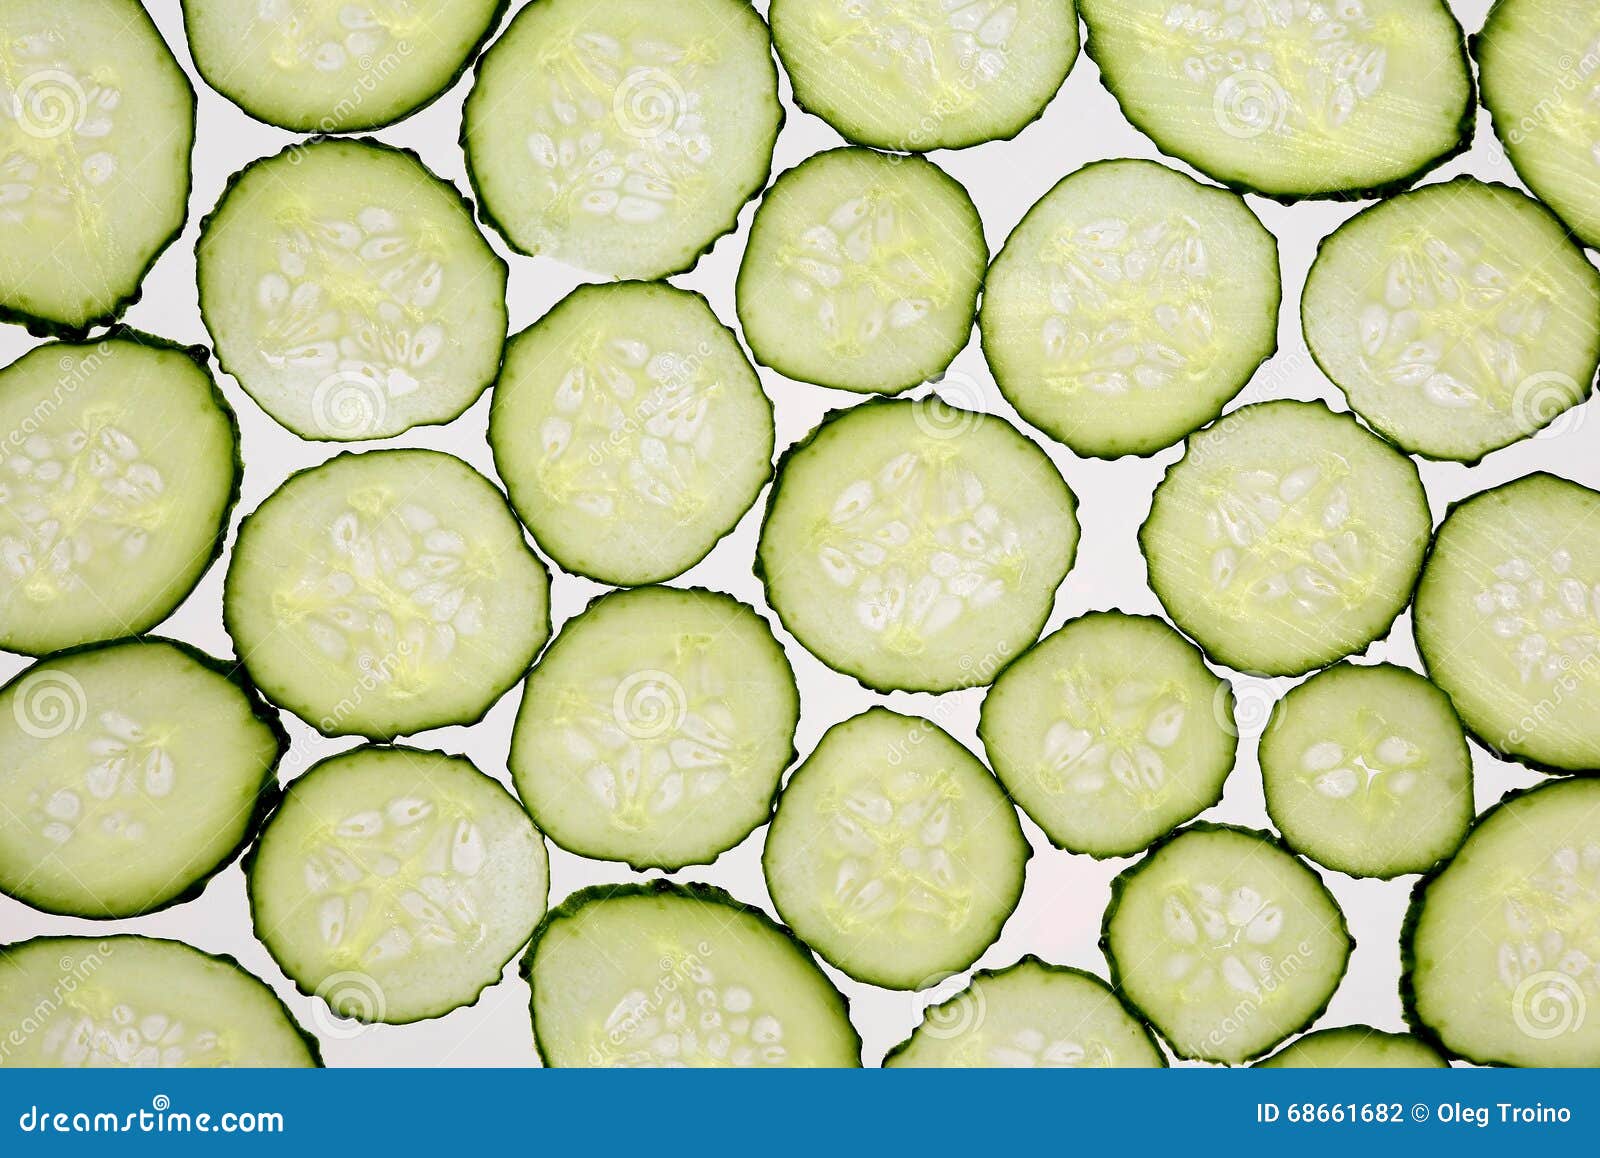 How To Chop Cucumber In Thin Slices 